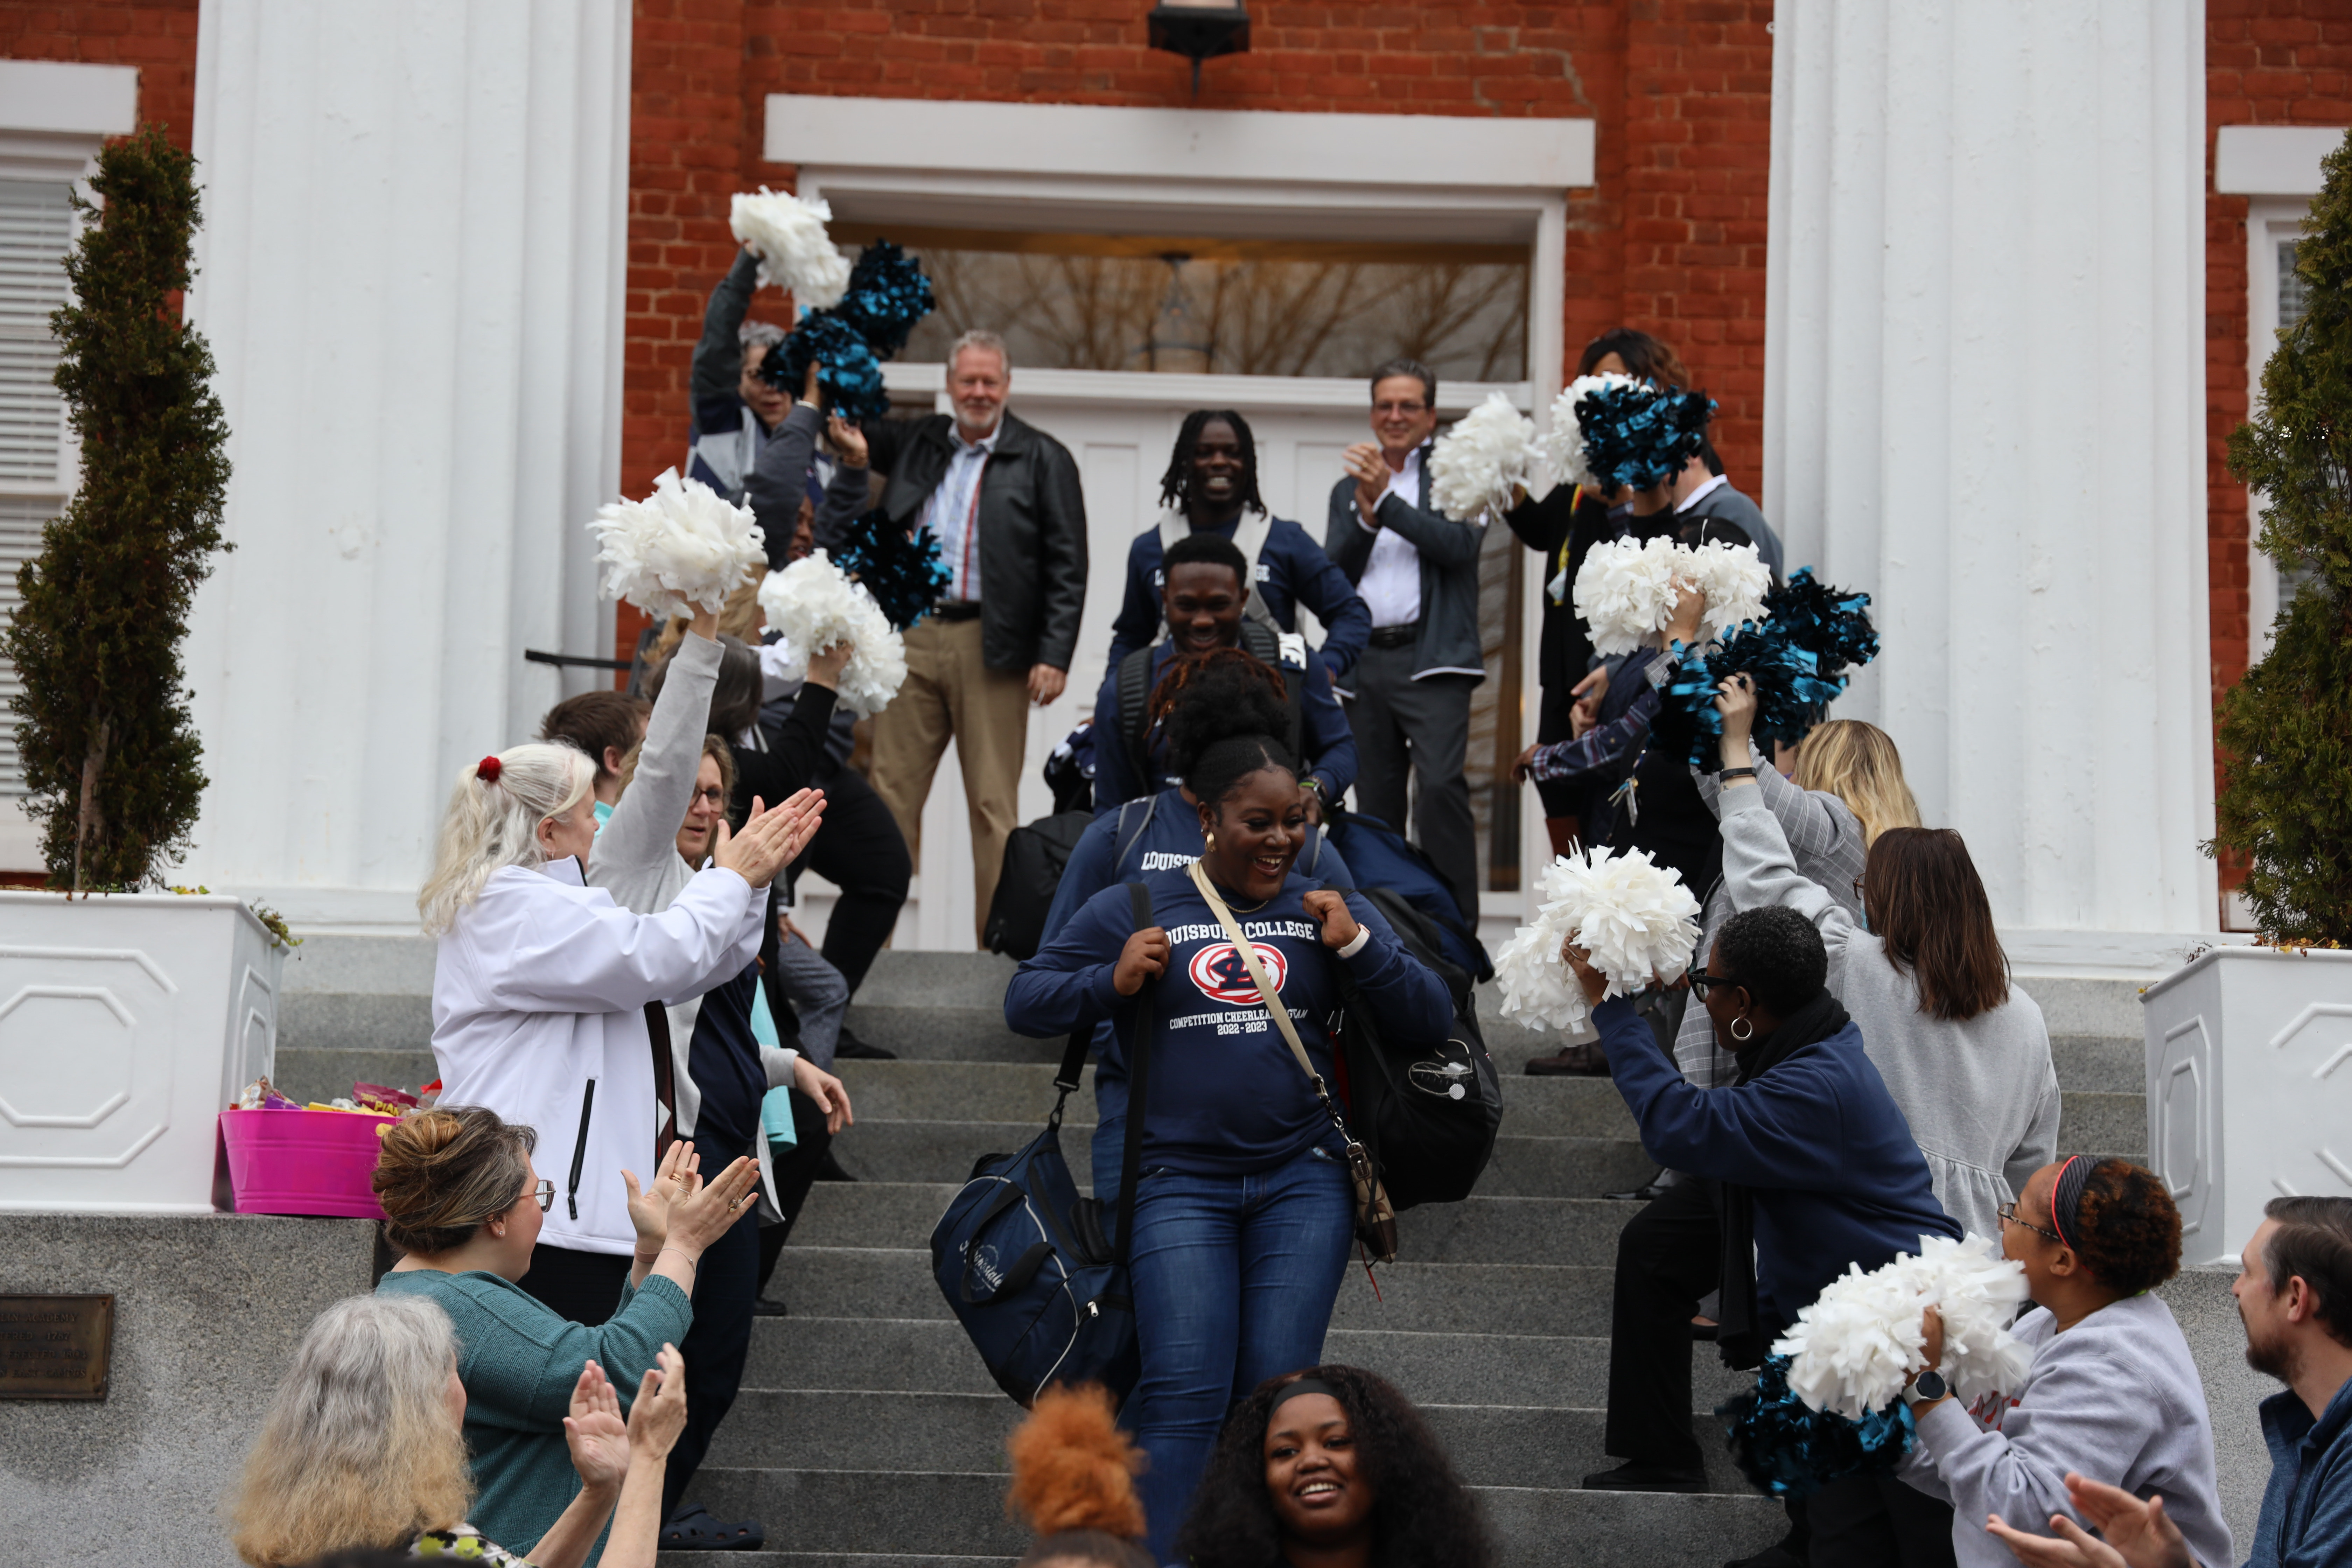 Cheerleading team leaving for nationals with administrators, faculty, and staff sending them off.